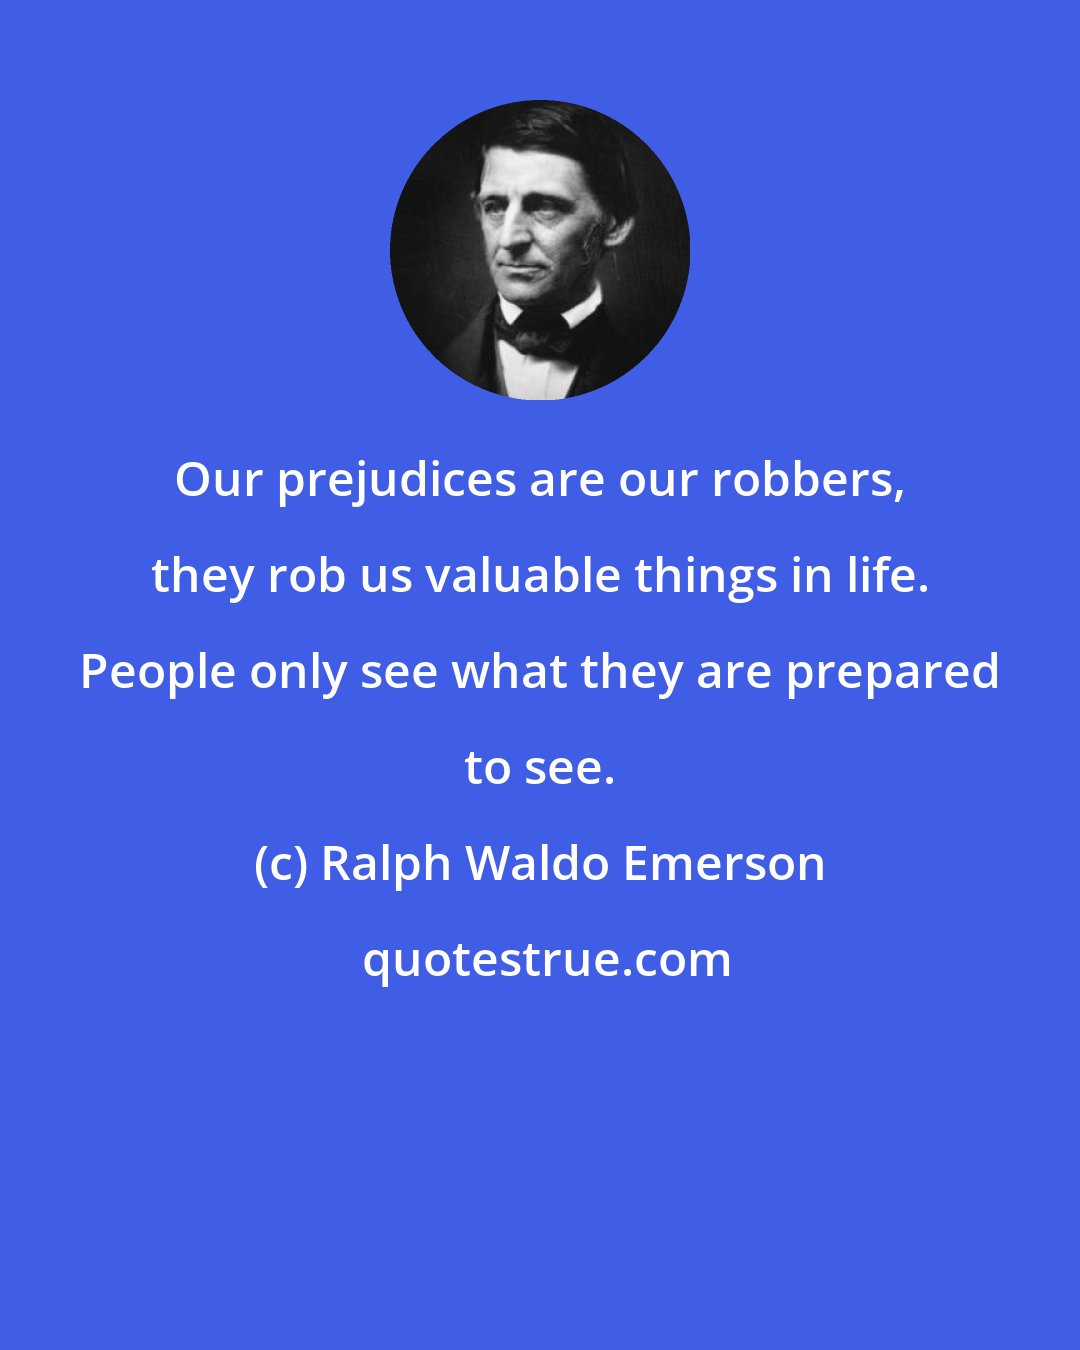 Ralph Waldo Emerson: Our prejudices are our robbers, they rob us valuable things in life. People only see what they are prepared to see.